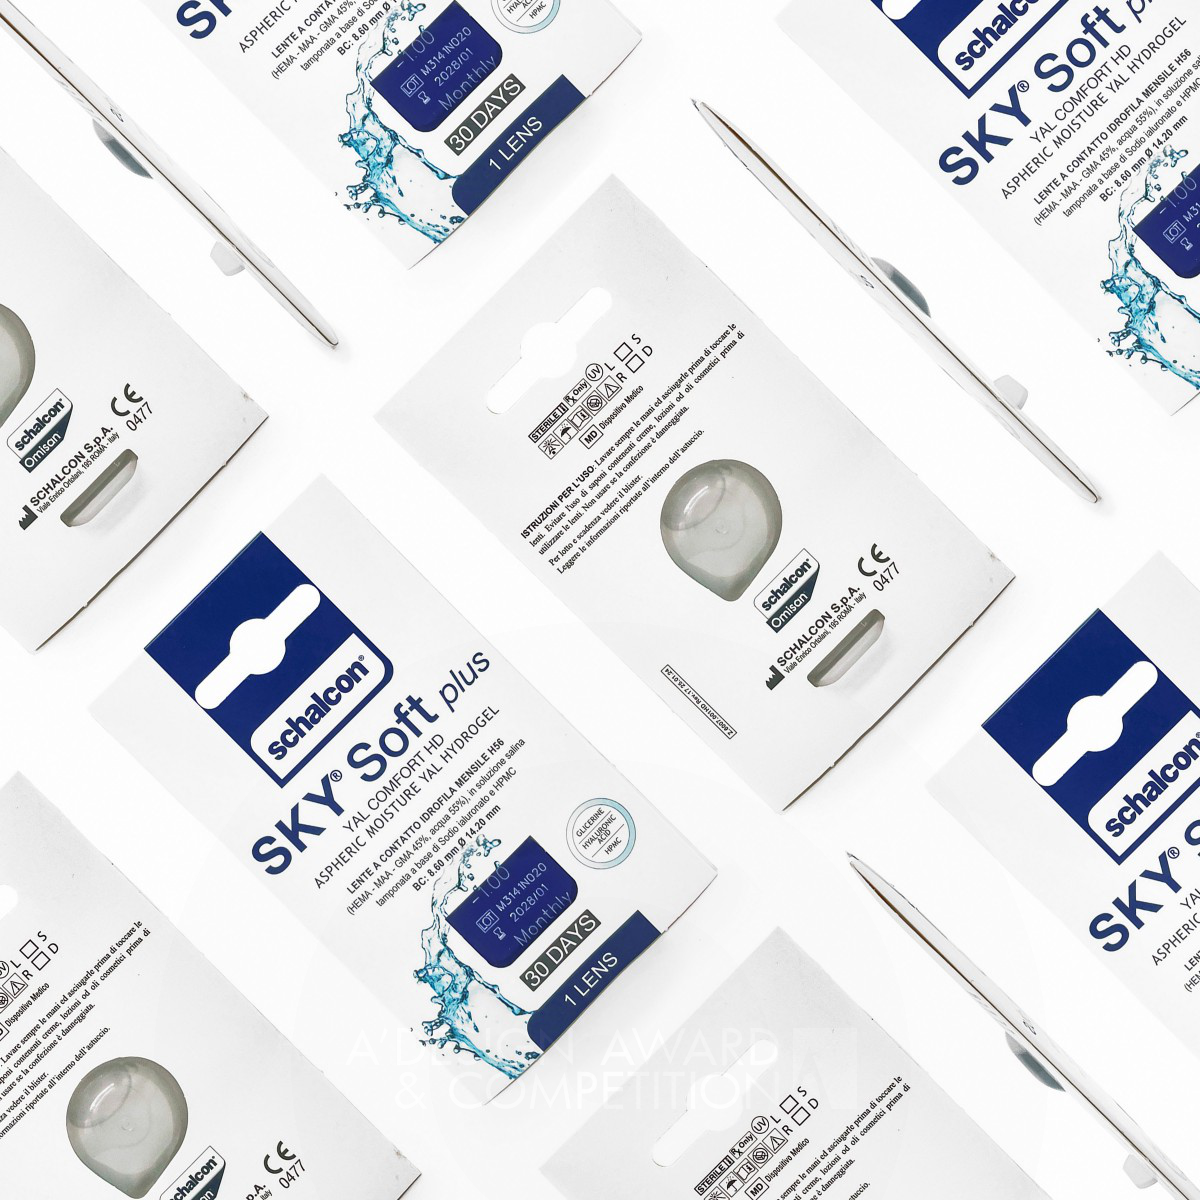 Sky Soft Plus Yal Comfort Hd Contact Lens Packaging by Schalcon spa